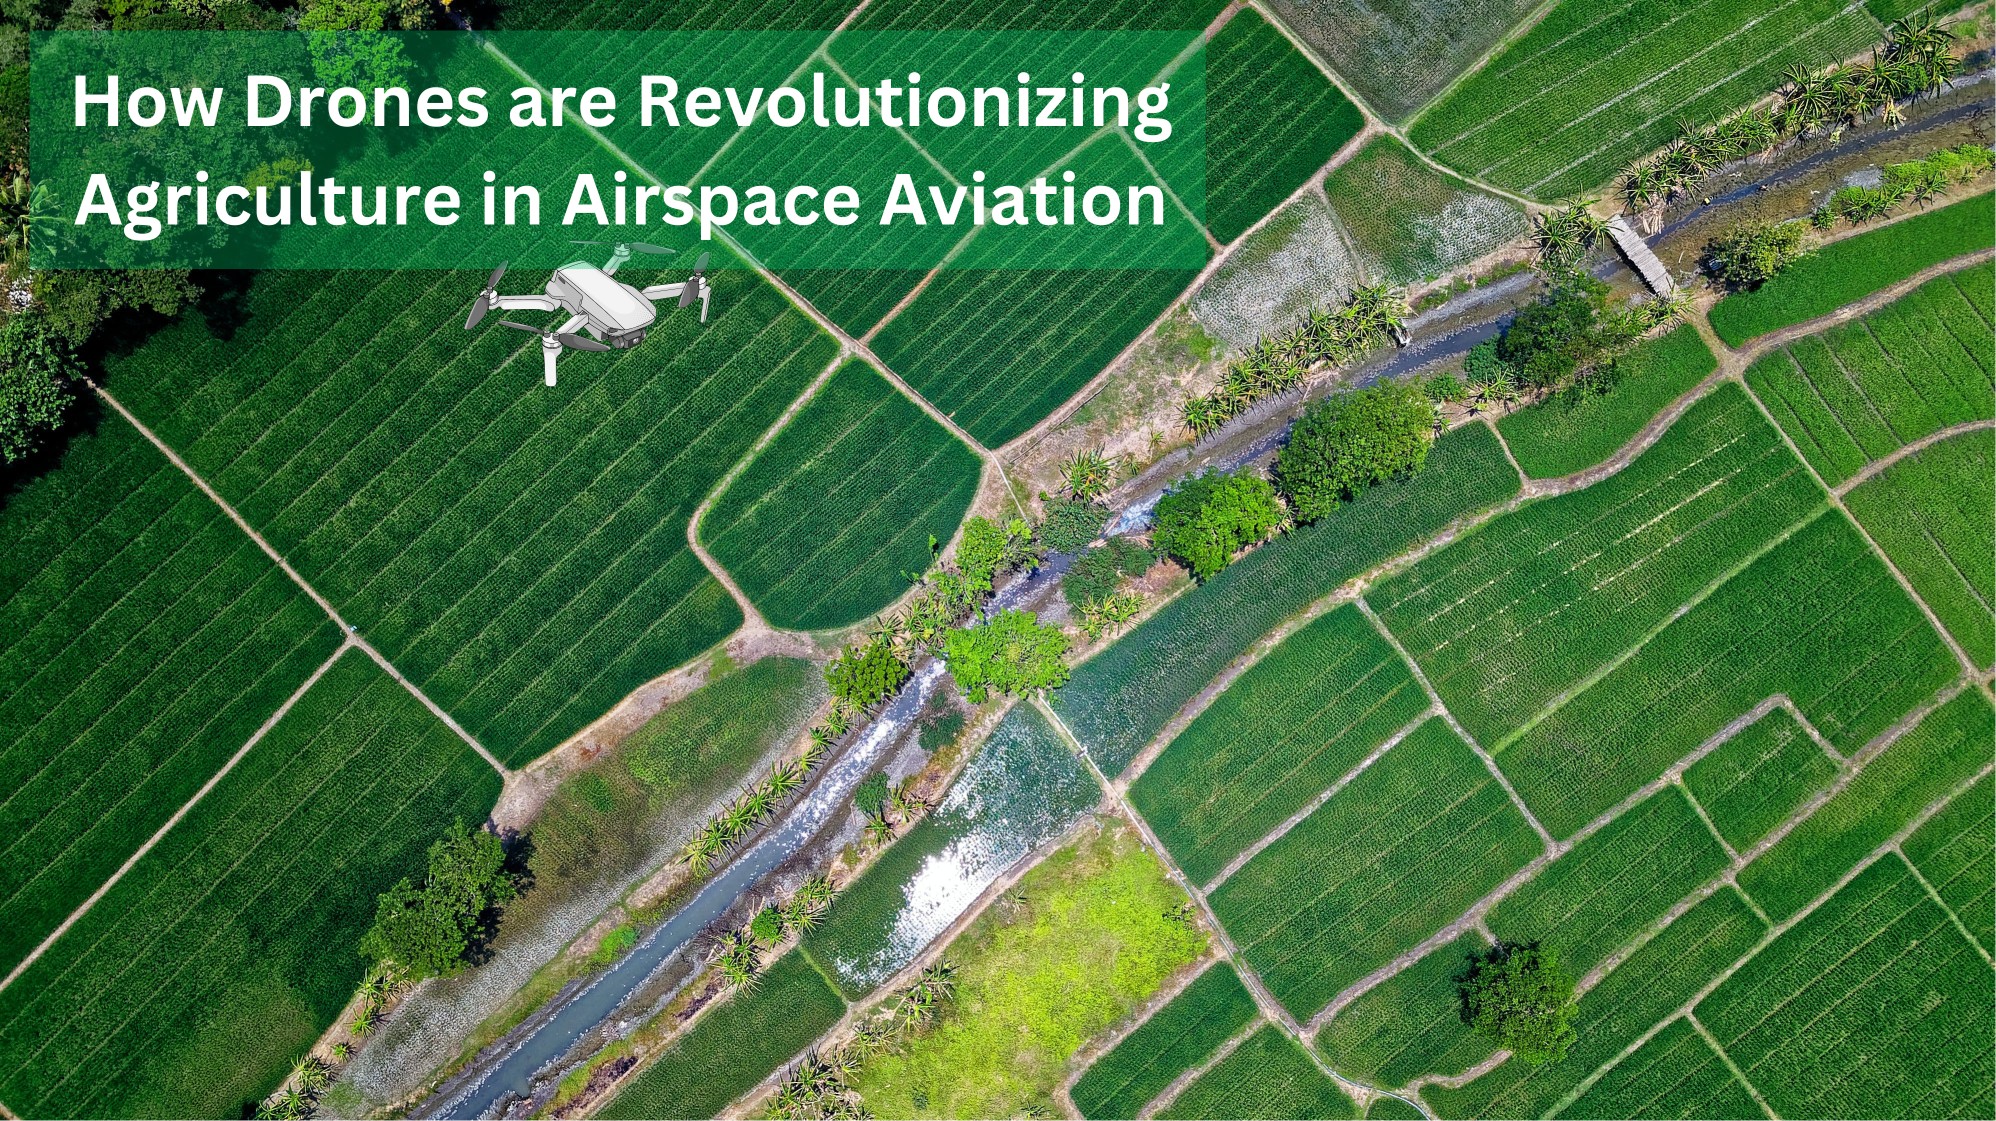 Drones are Revolutionizing Agriculture in Airspace Aviation